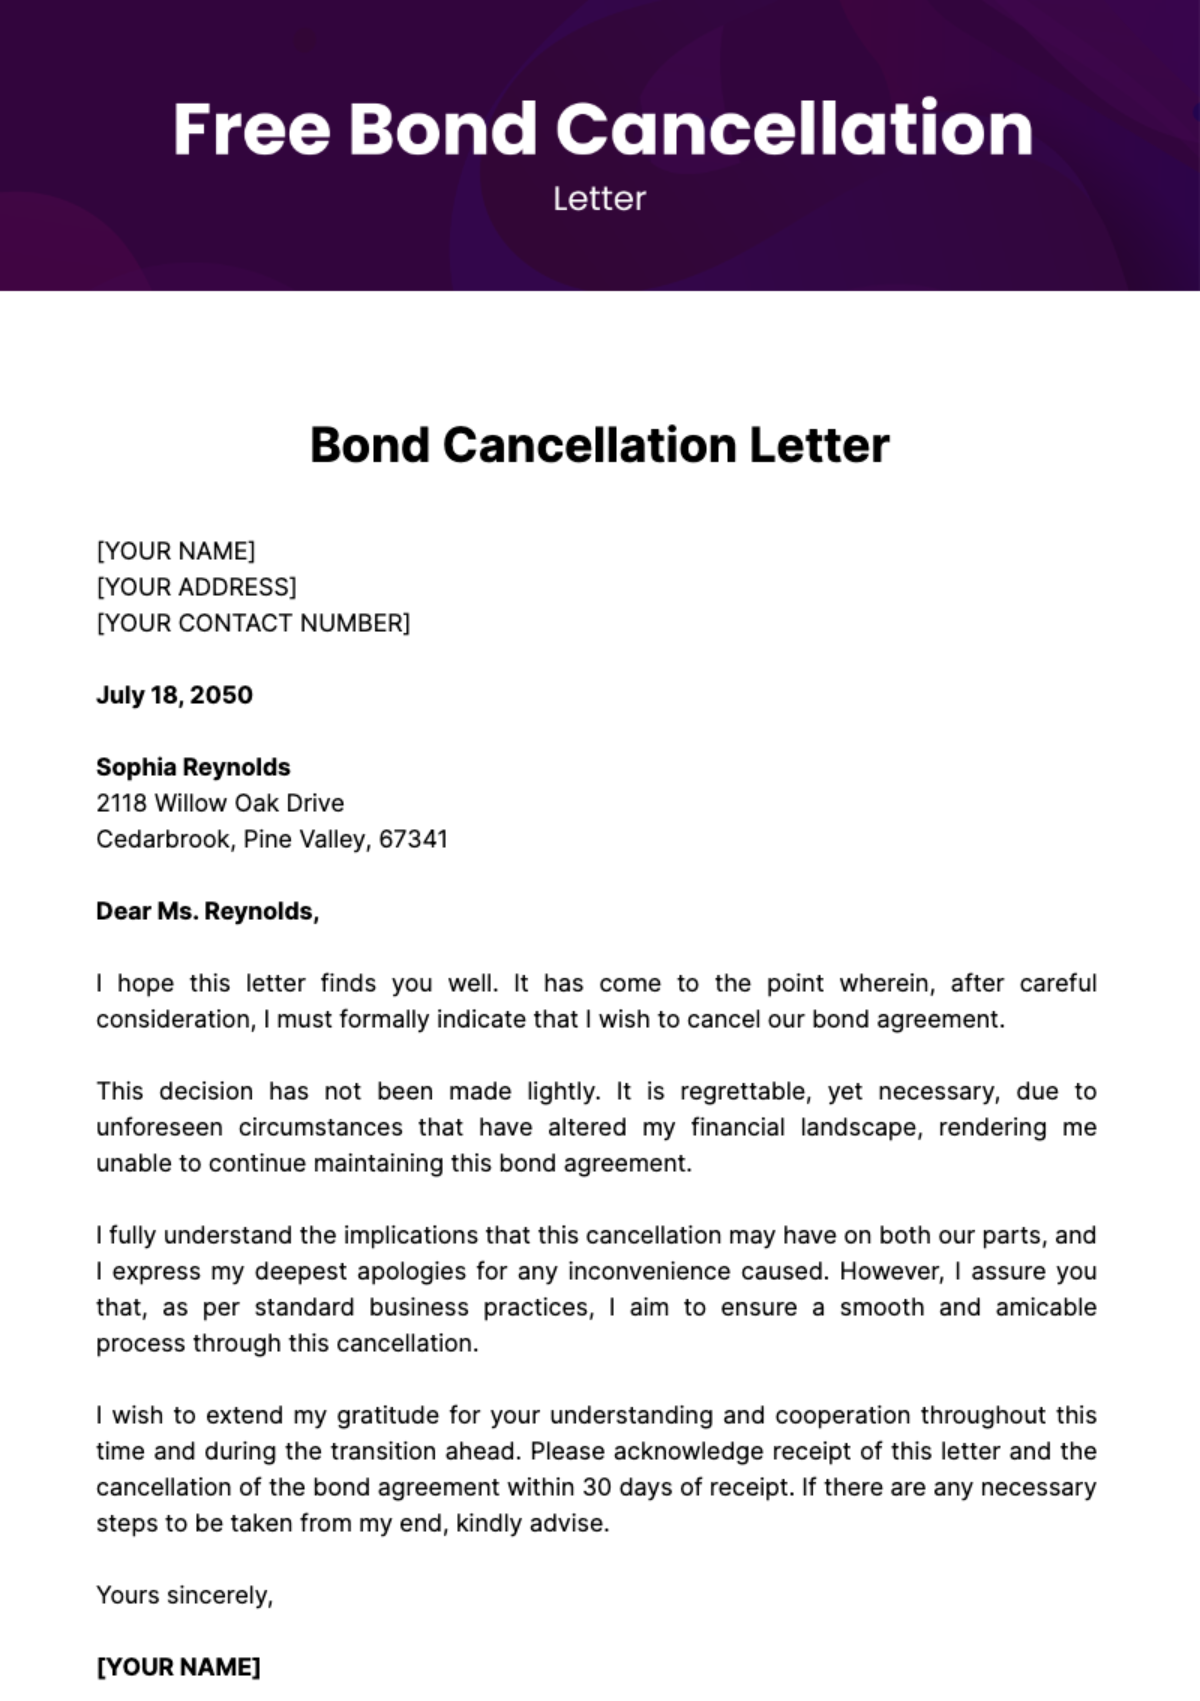 Free Bond Cancellation Letter Template